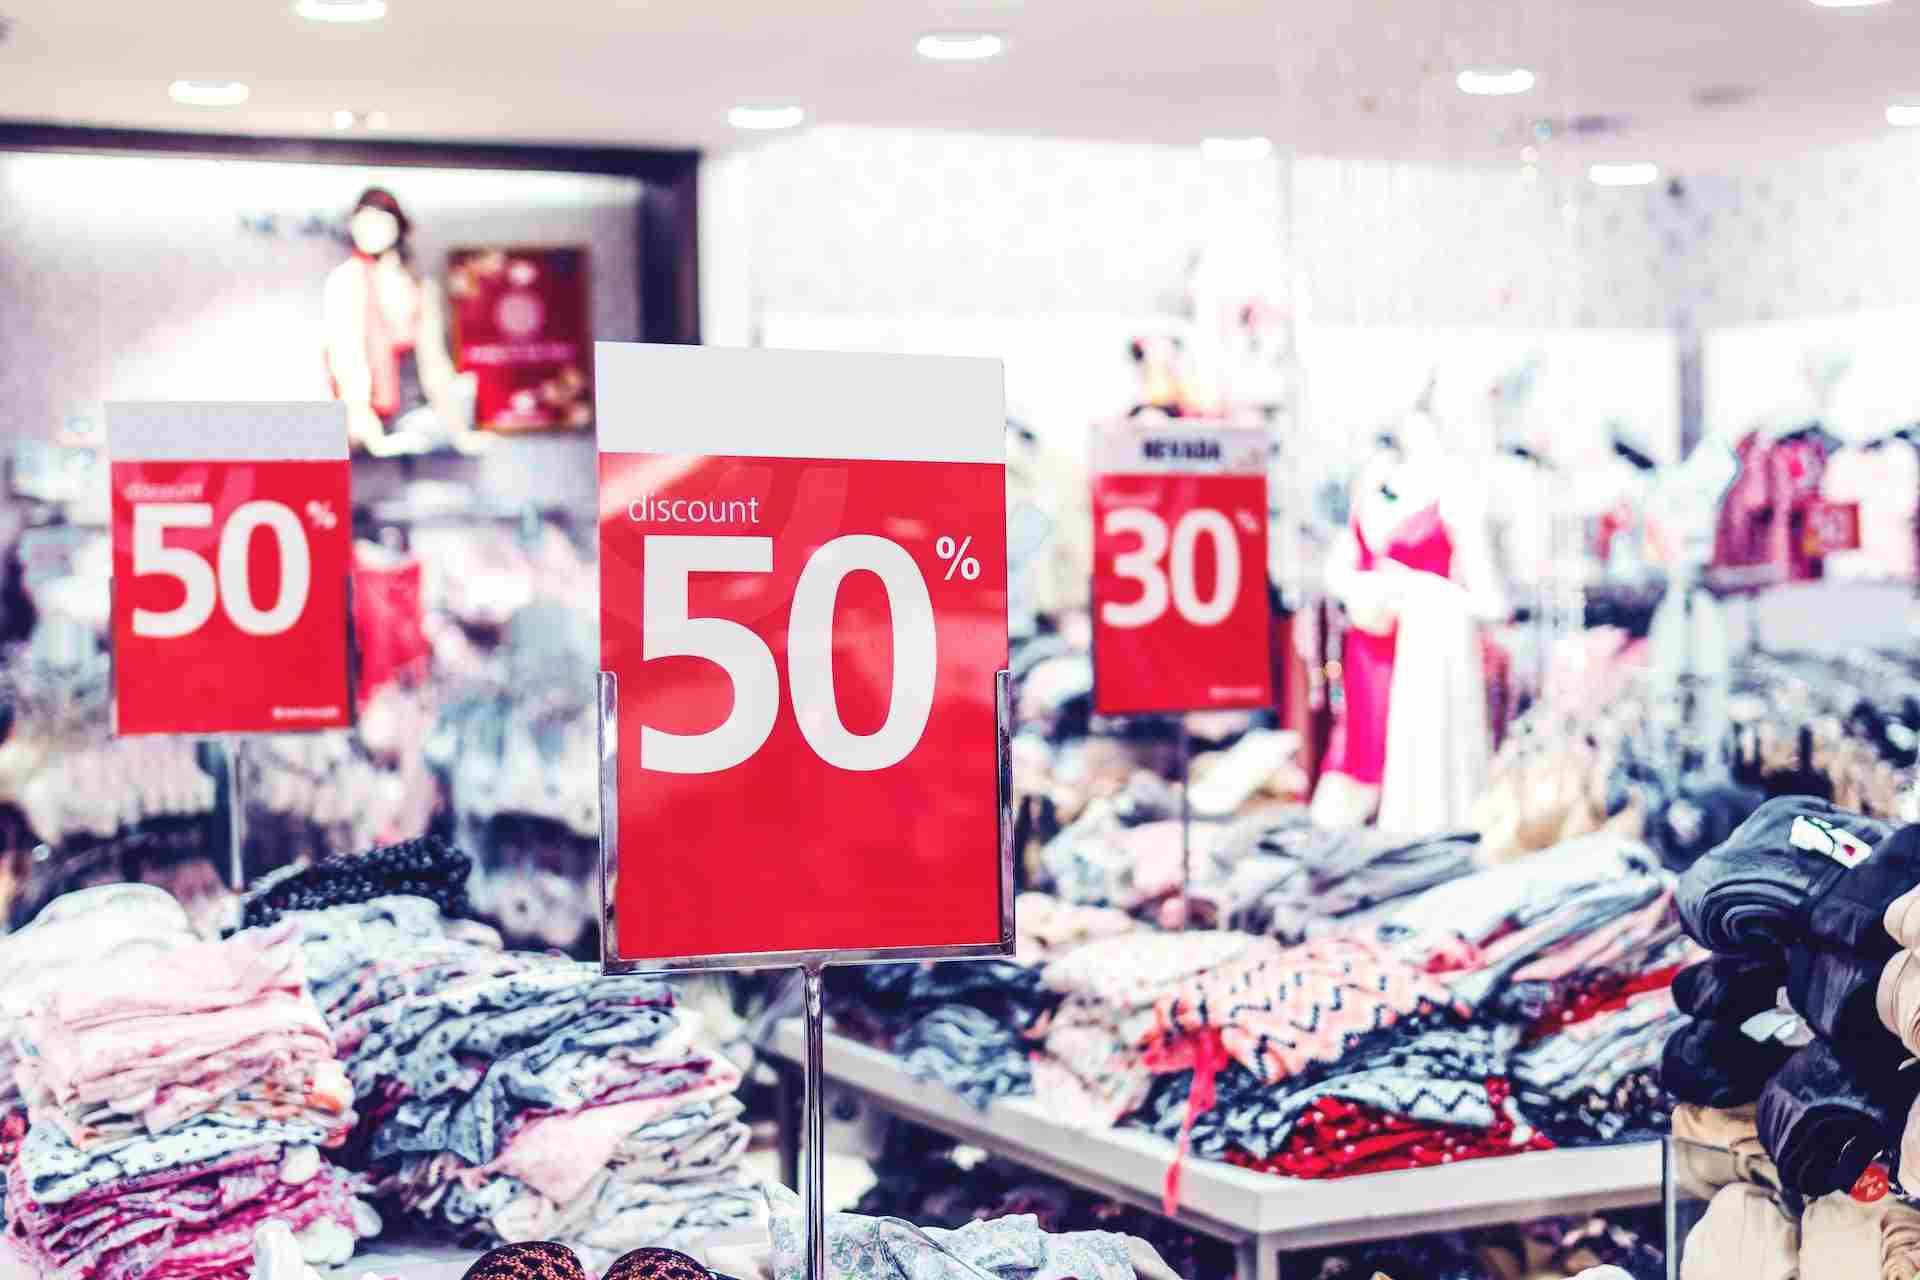 How to Cope with Inventory Overstock & Understock in Retail?